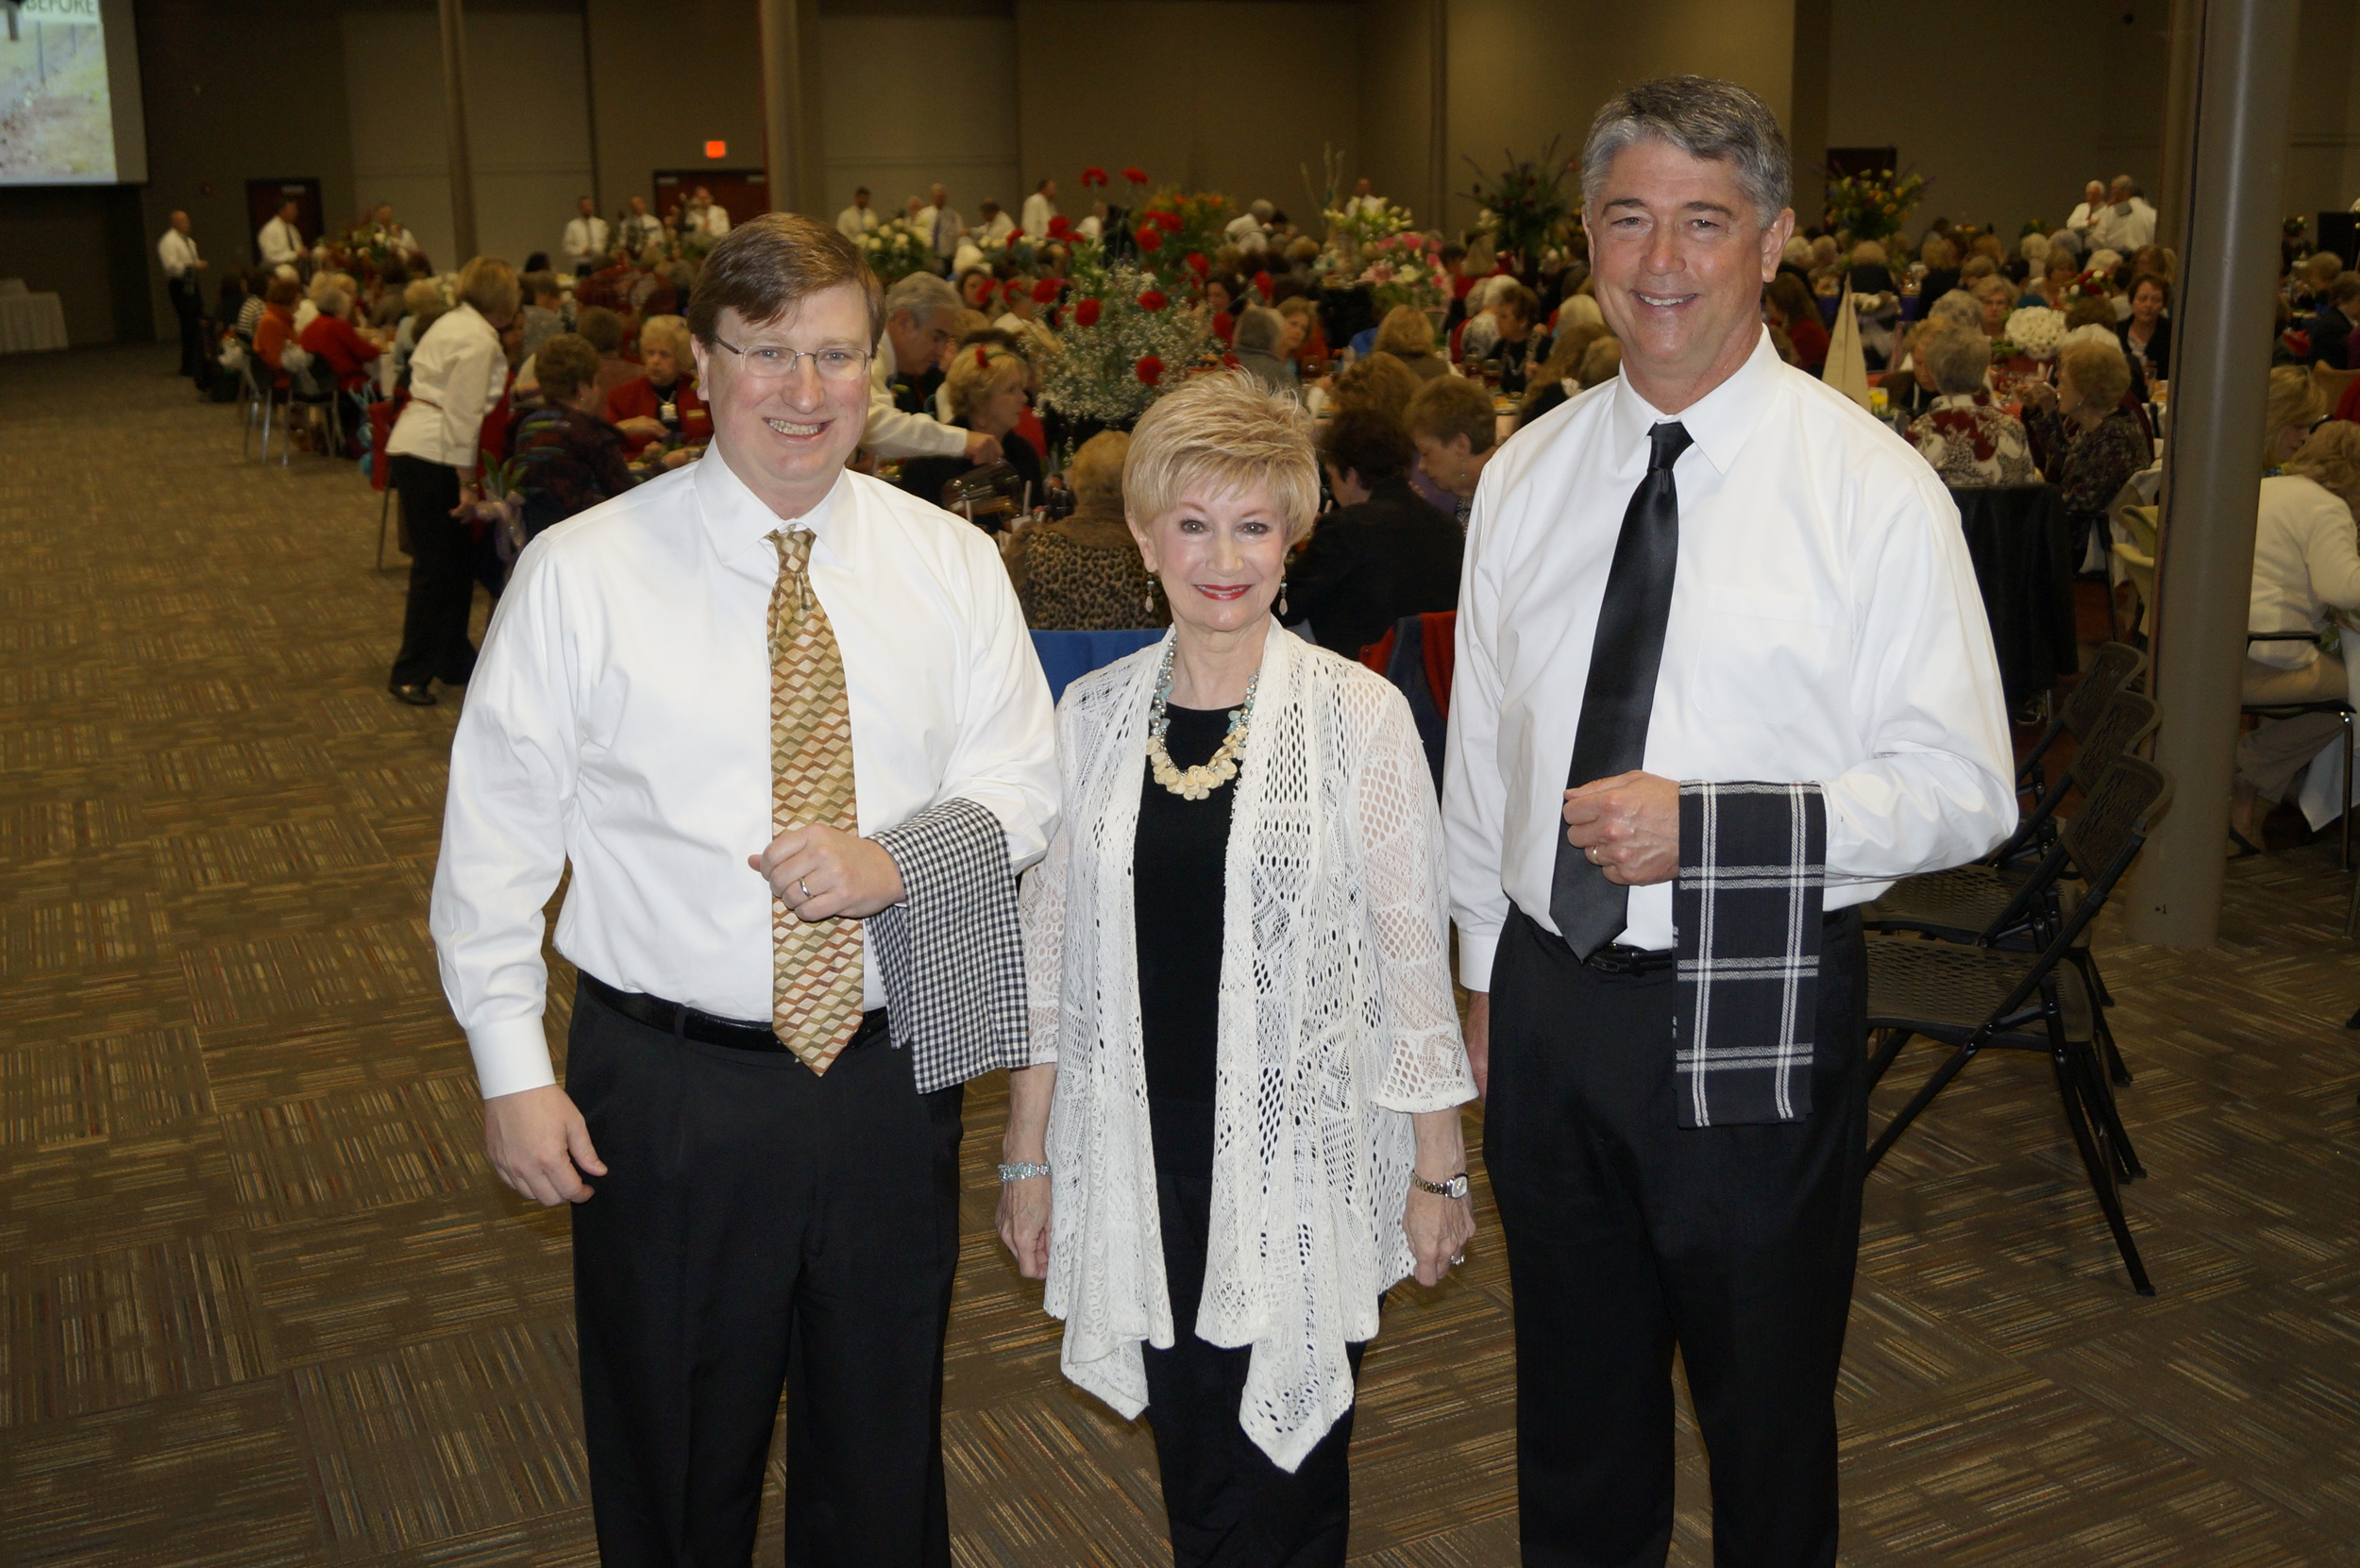   Brandon Garden Club (BGC) had 44 “celebrity” servers to wait on the 320 guests&nbsp;at&nbsp;40&nbsp;uniquely&nbsp;decorated&nbsp;  tables  .&nbsp; Servers pictured (l to r):&nbsp; Lt. Governor Tate Reeves, BGC President Charla Jordan, and Brandon M